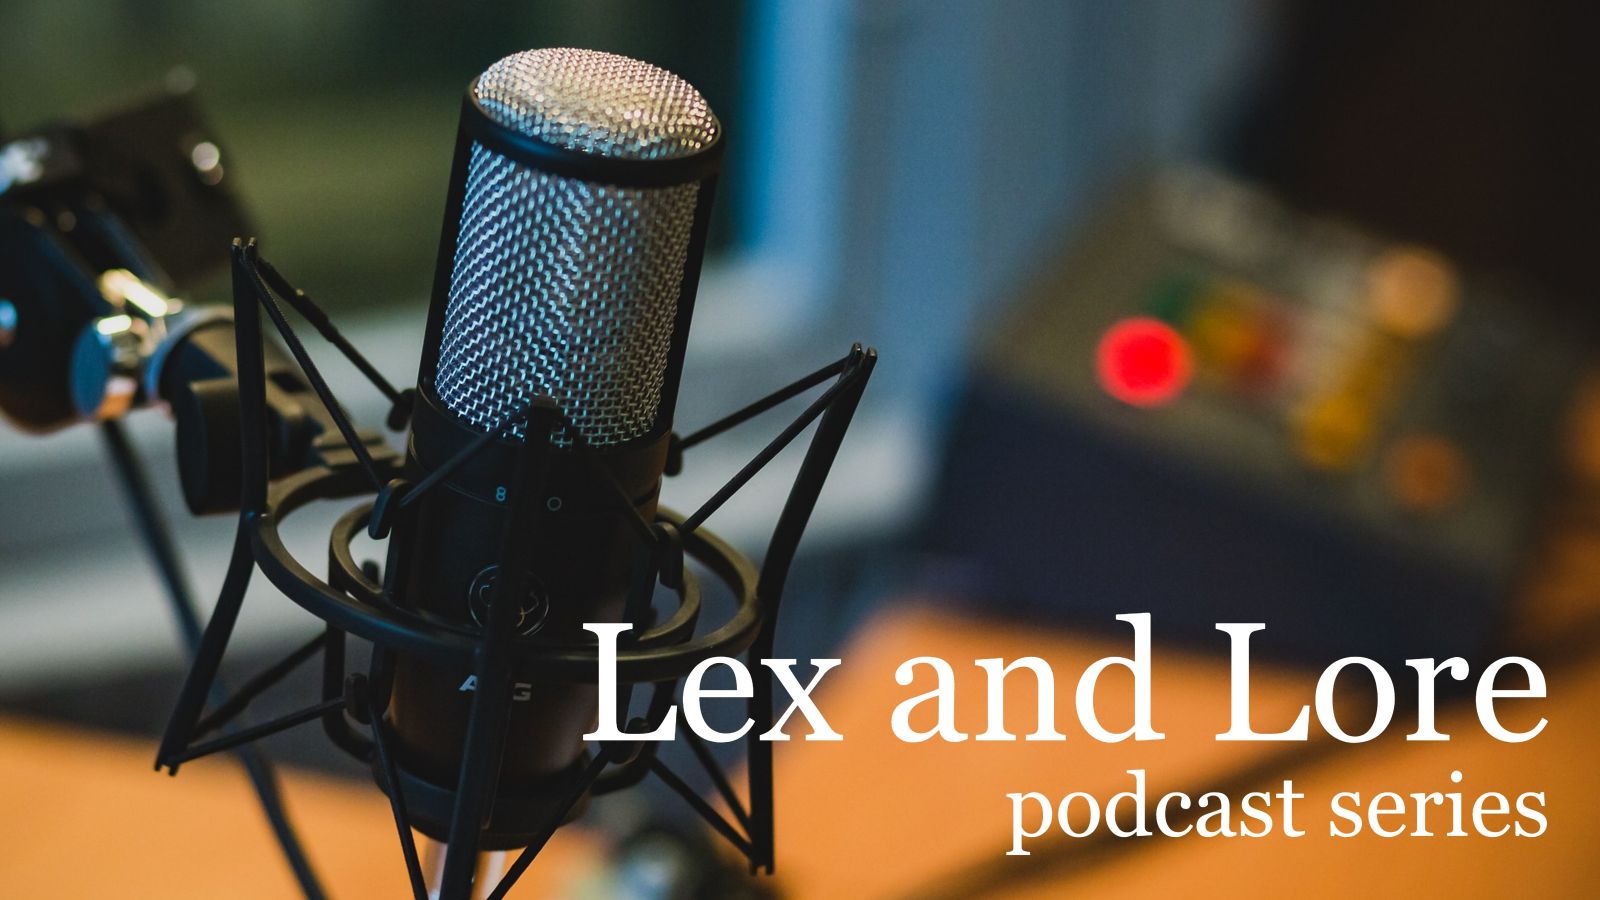 Lex and lore podcast series image of a microphone in a recording studio.